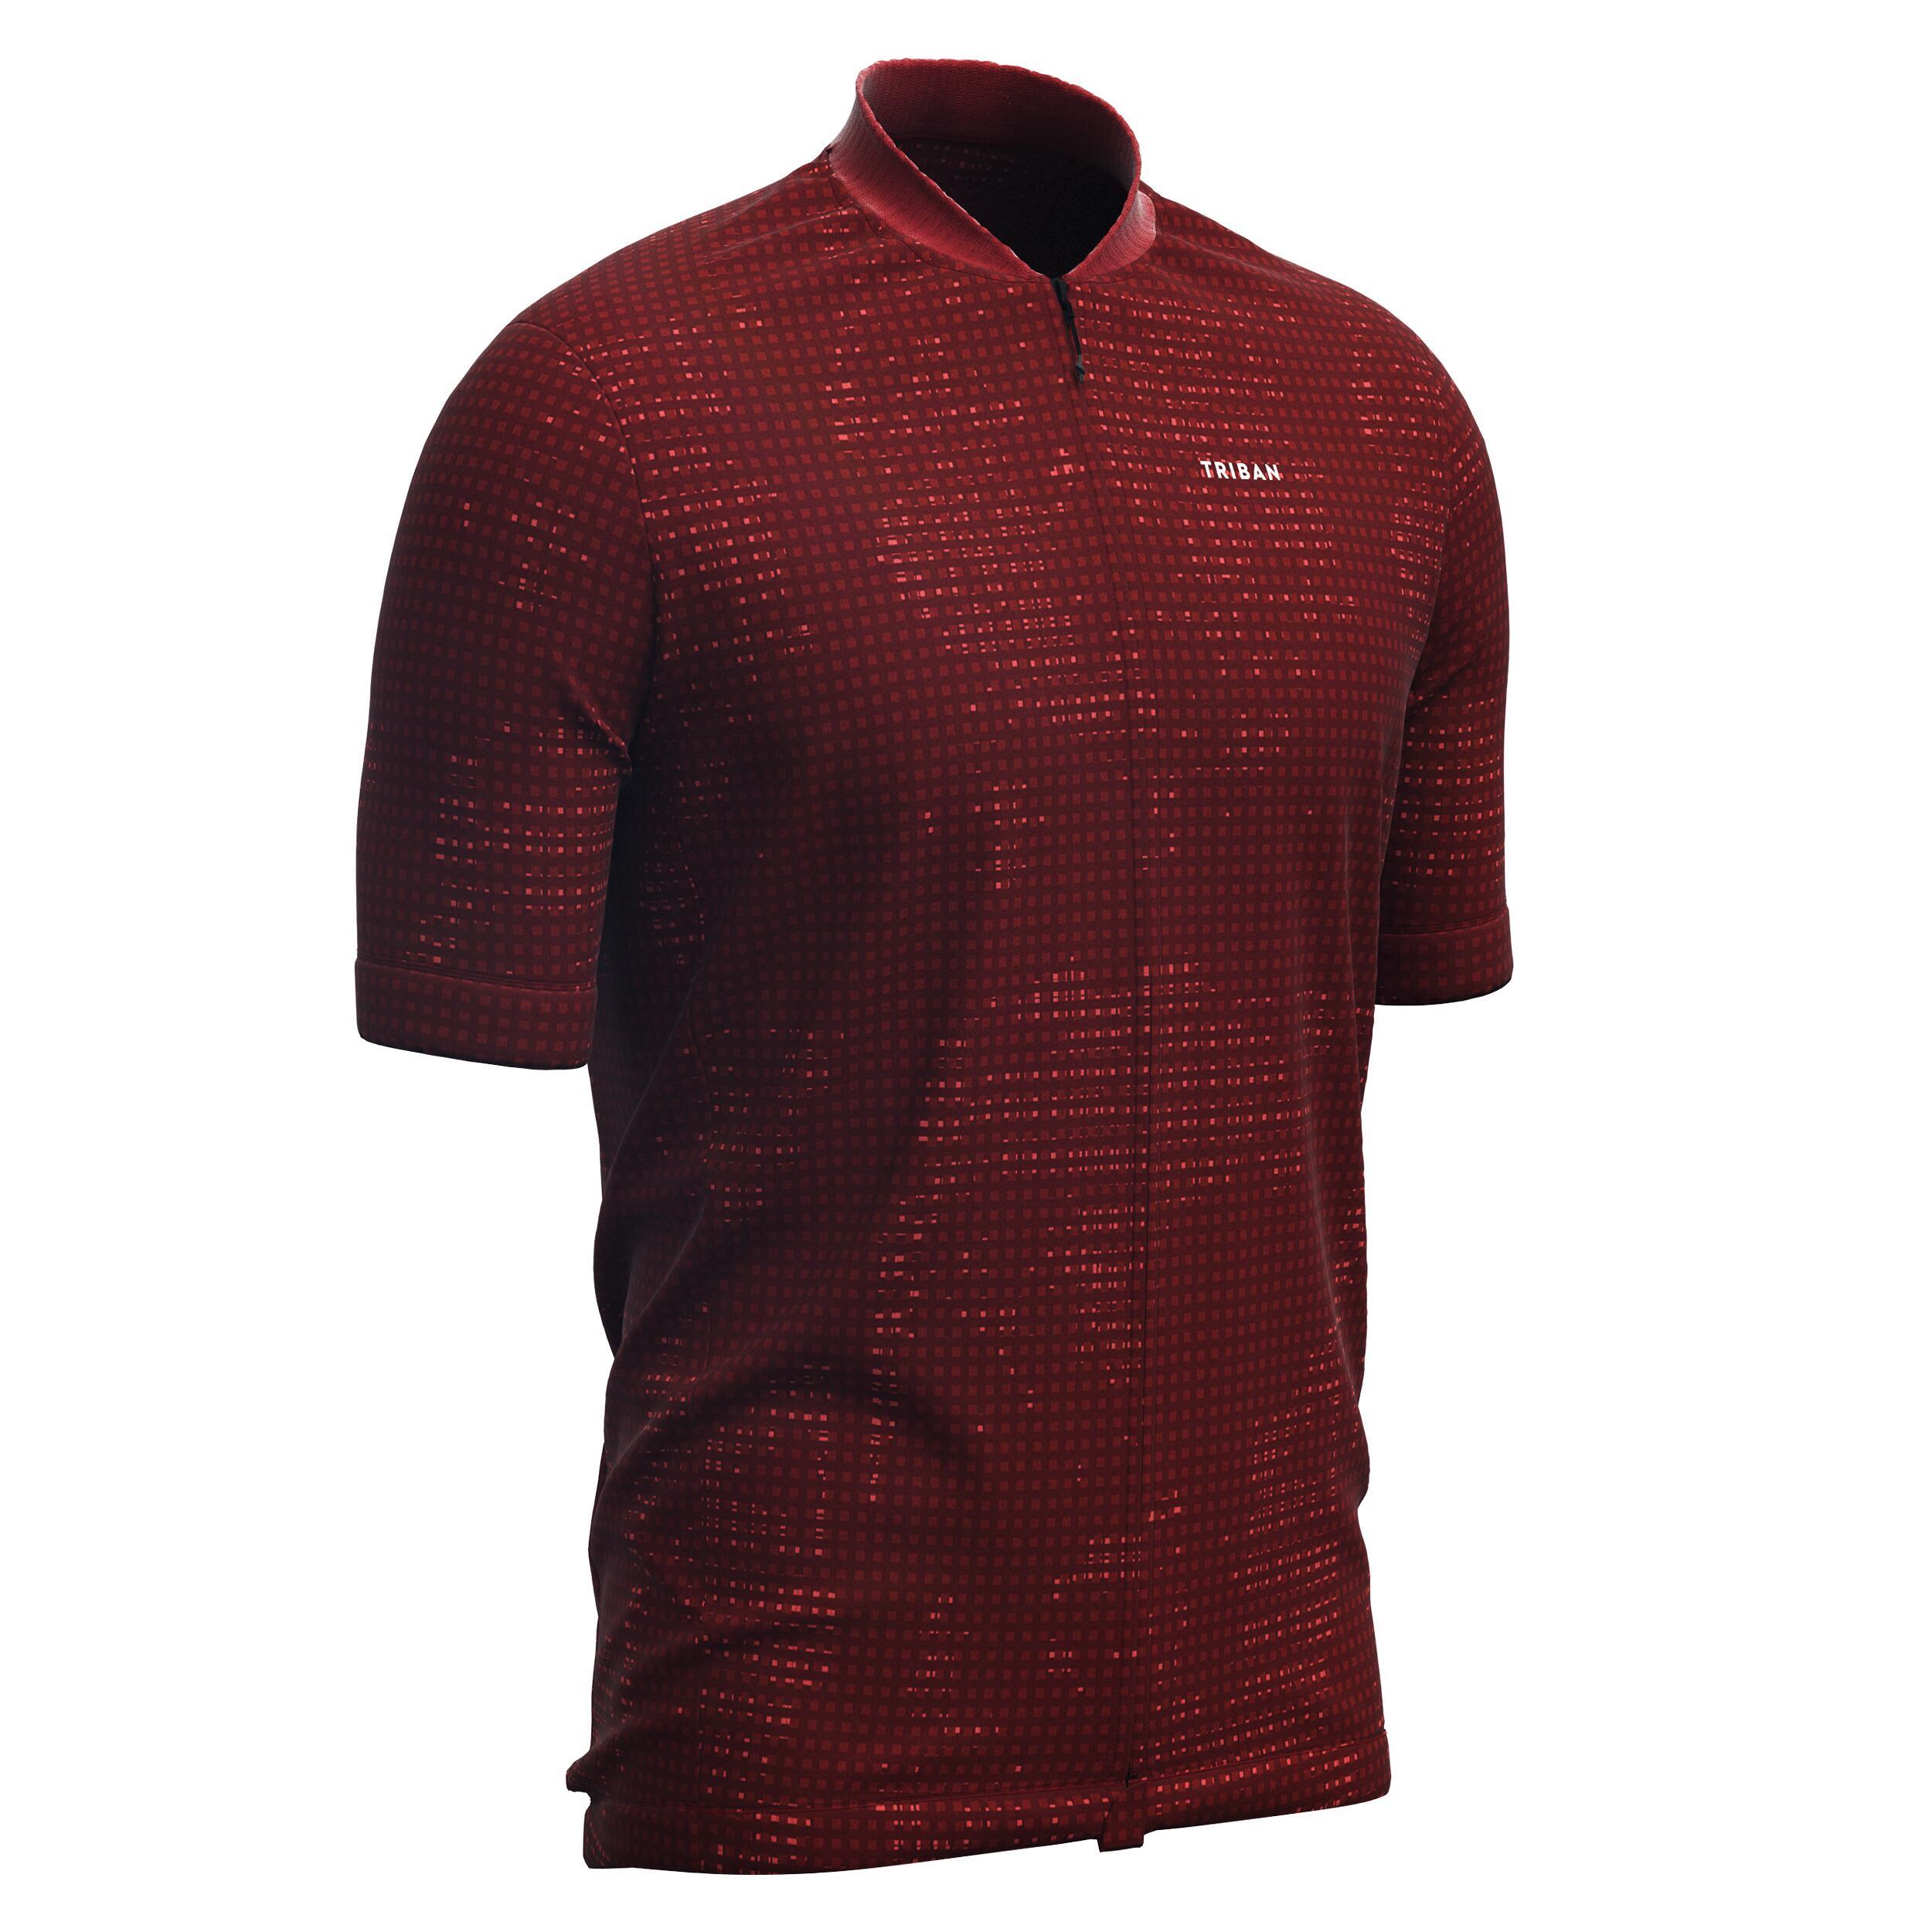 Men's Short-Sleeved Road Cycling Summer Jersey RC100 - Burgundy 1/7